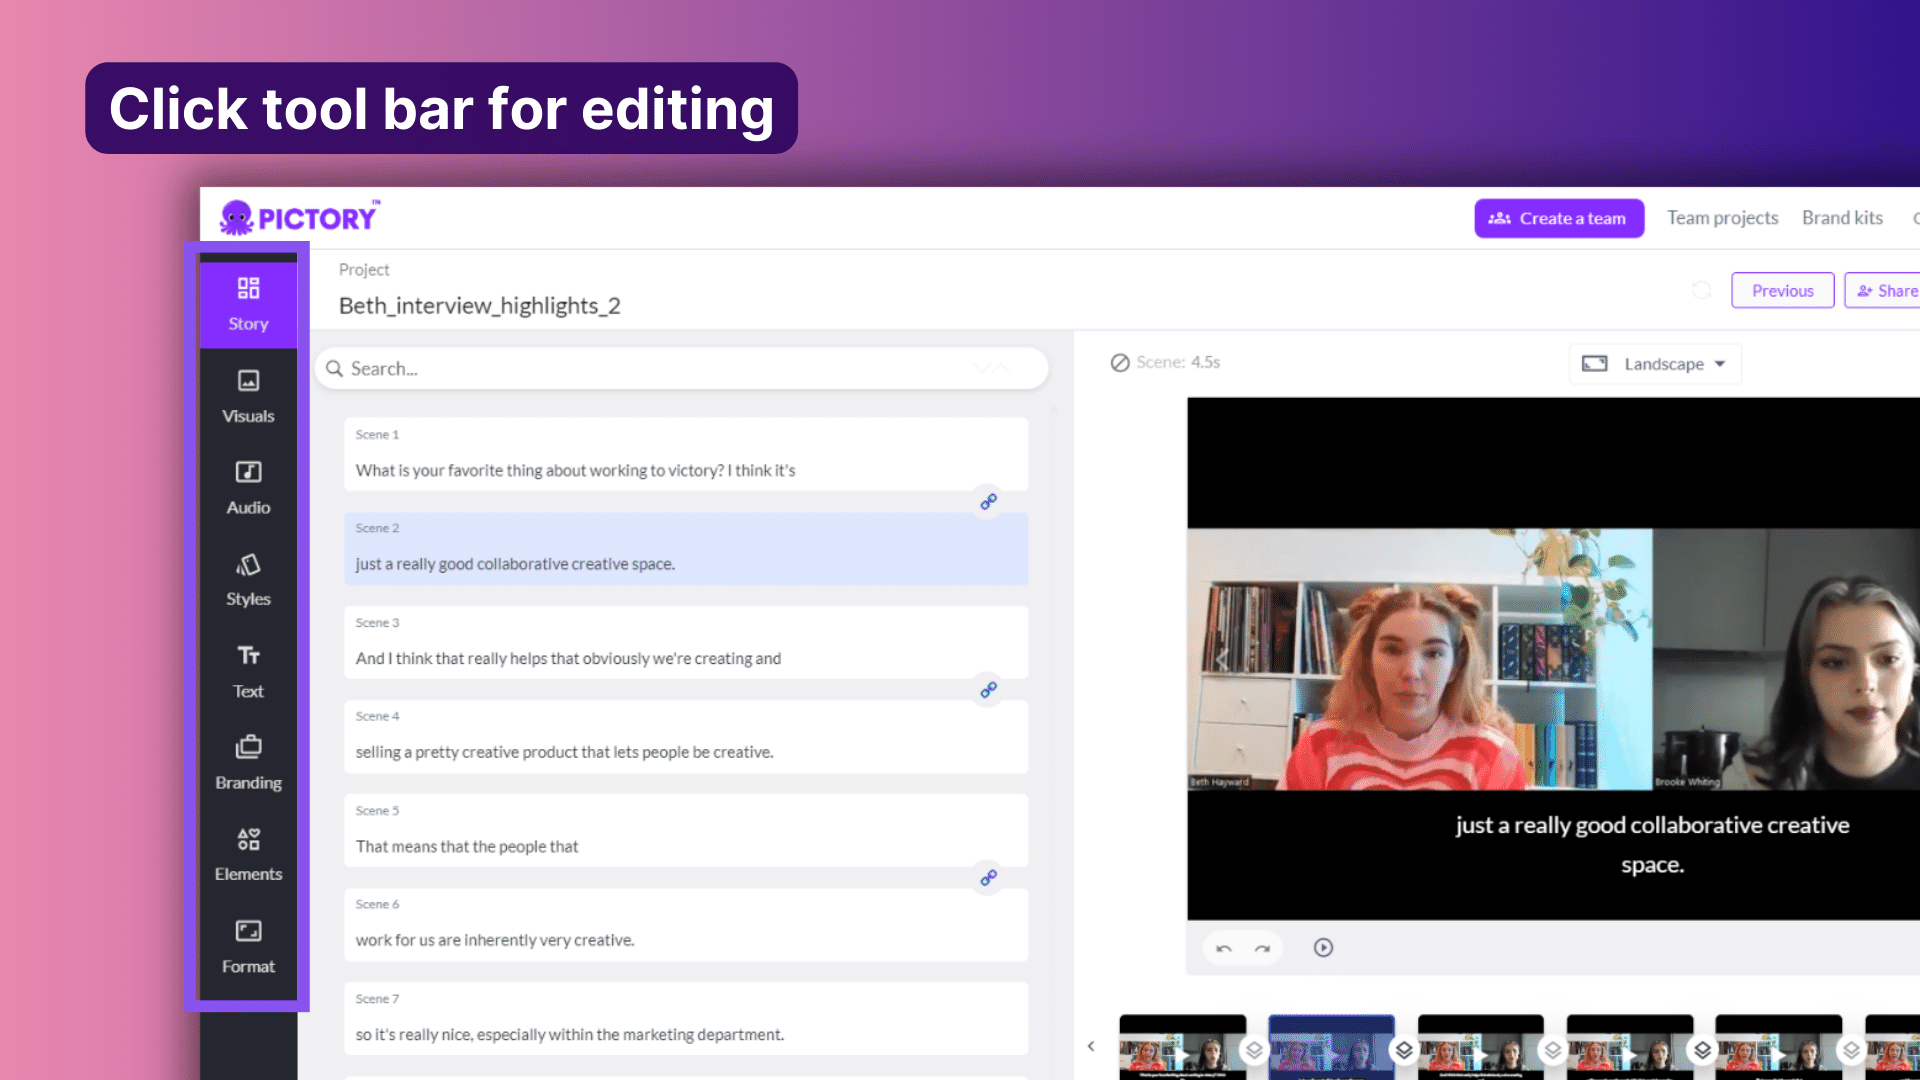 Pictory's tool bar for editing videos, showing where to add captions, music, voiceover, and branding